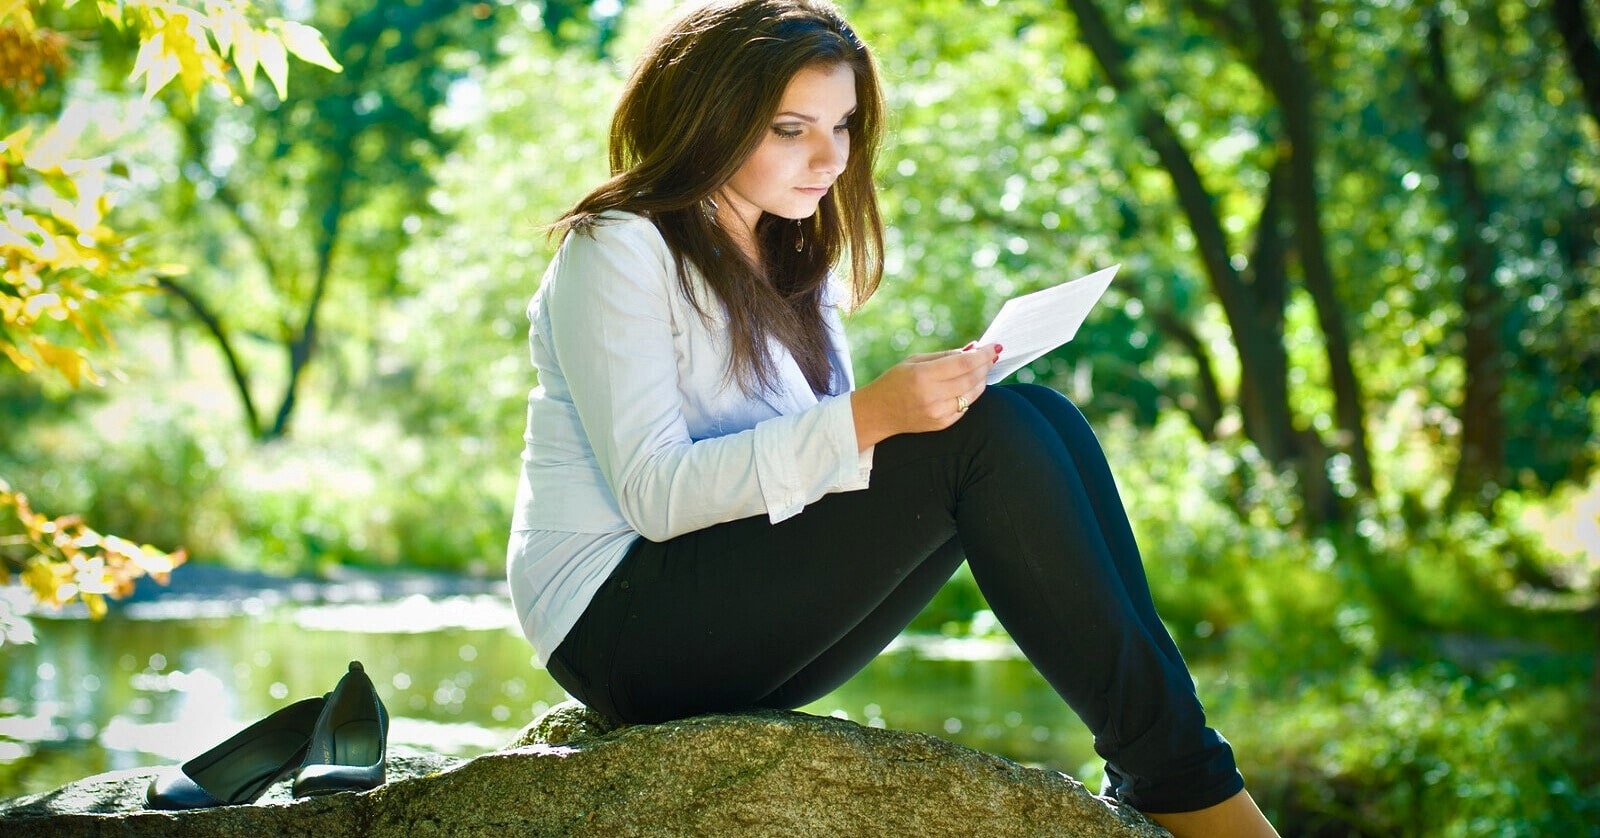 young woman reading a letter in a forest setting